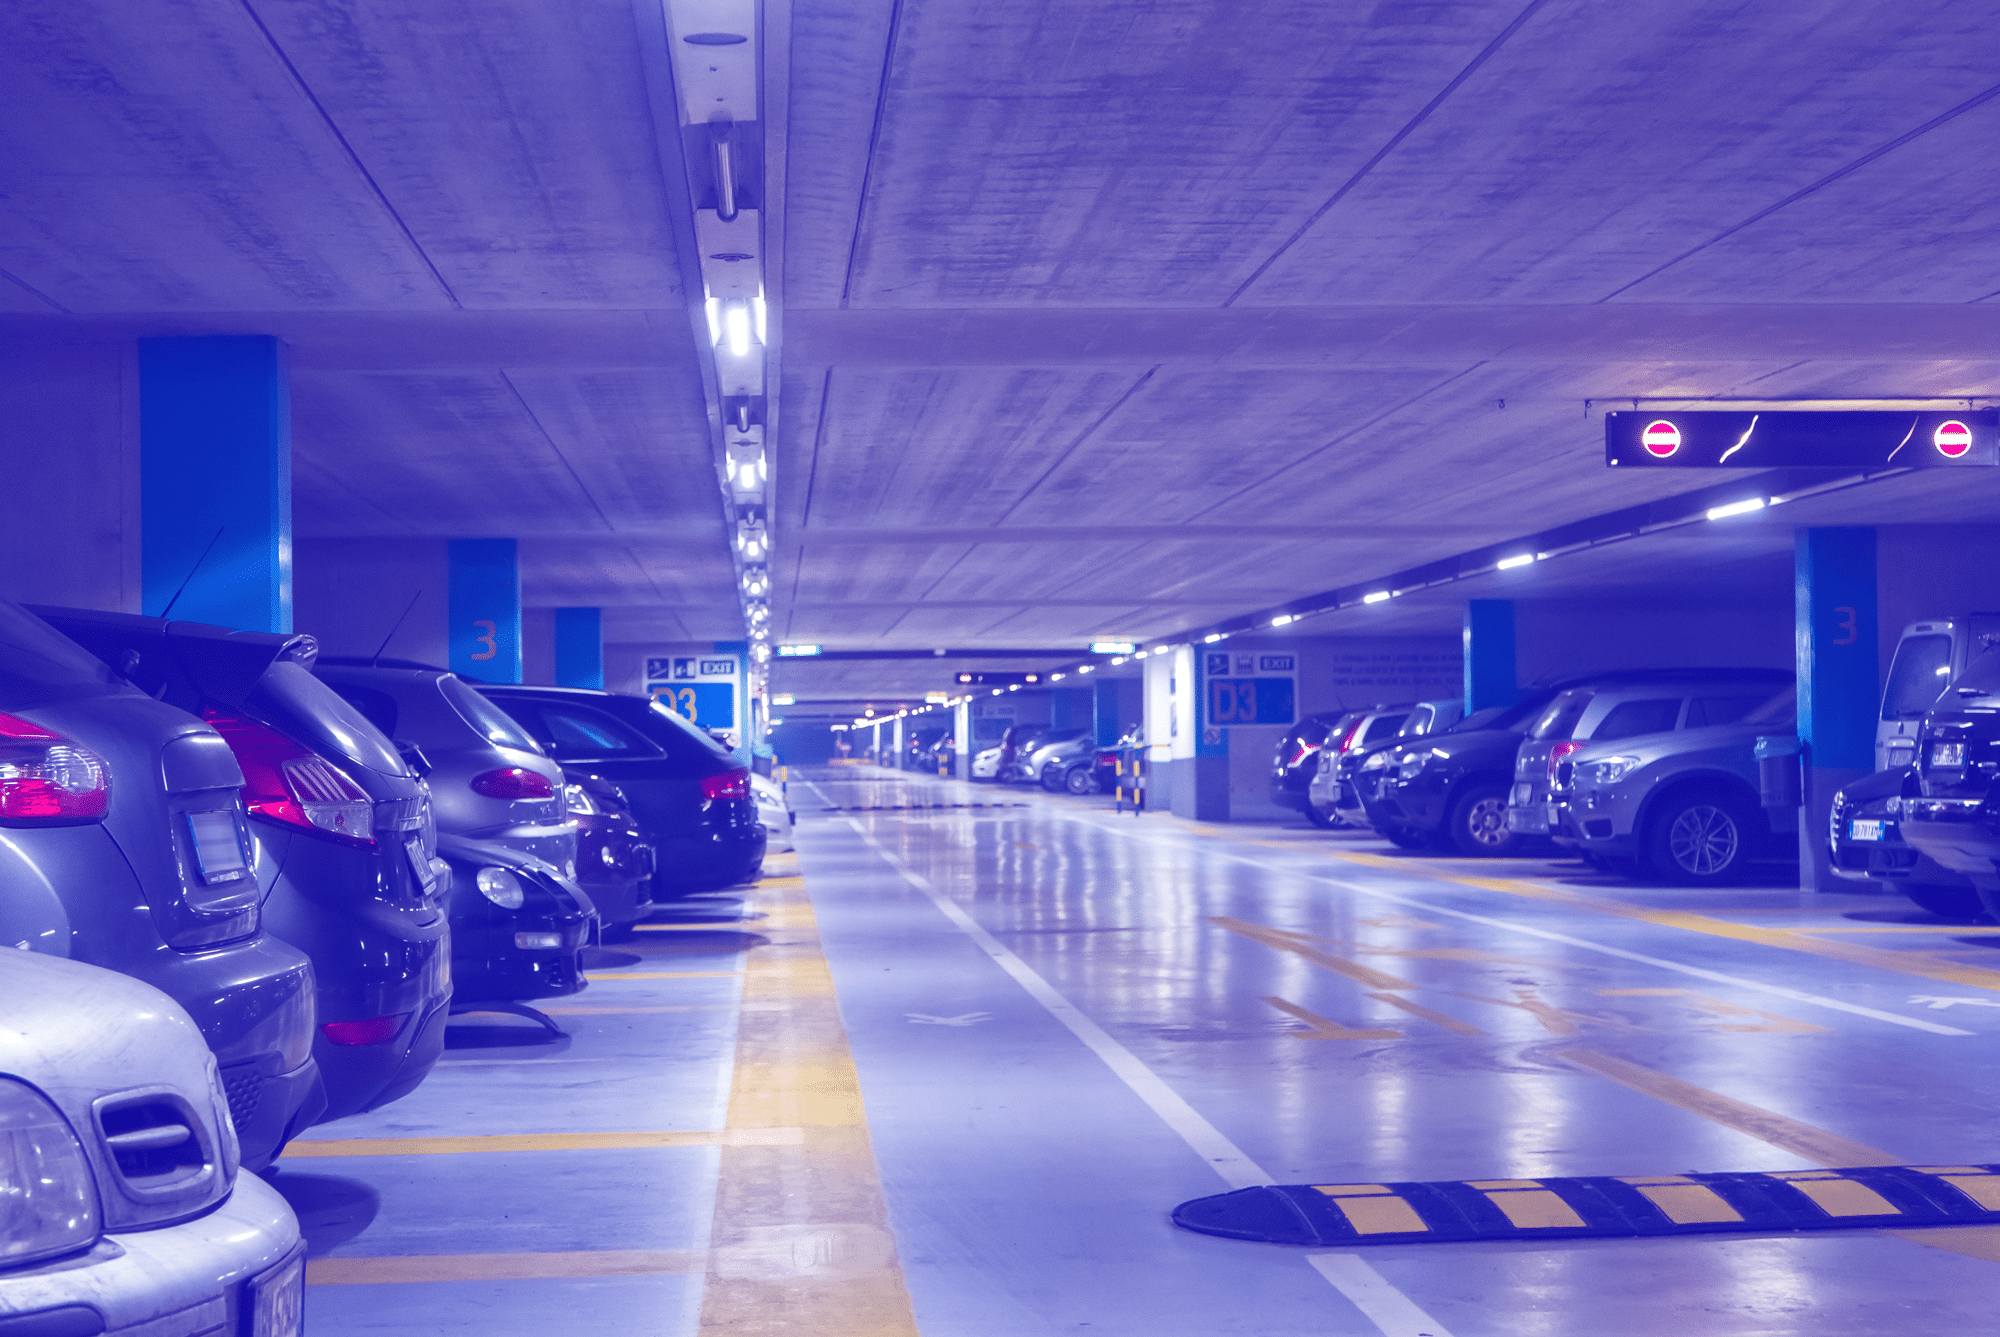 A professional parking garage with cars parked in it.